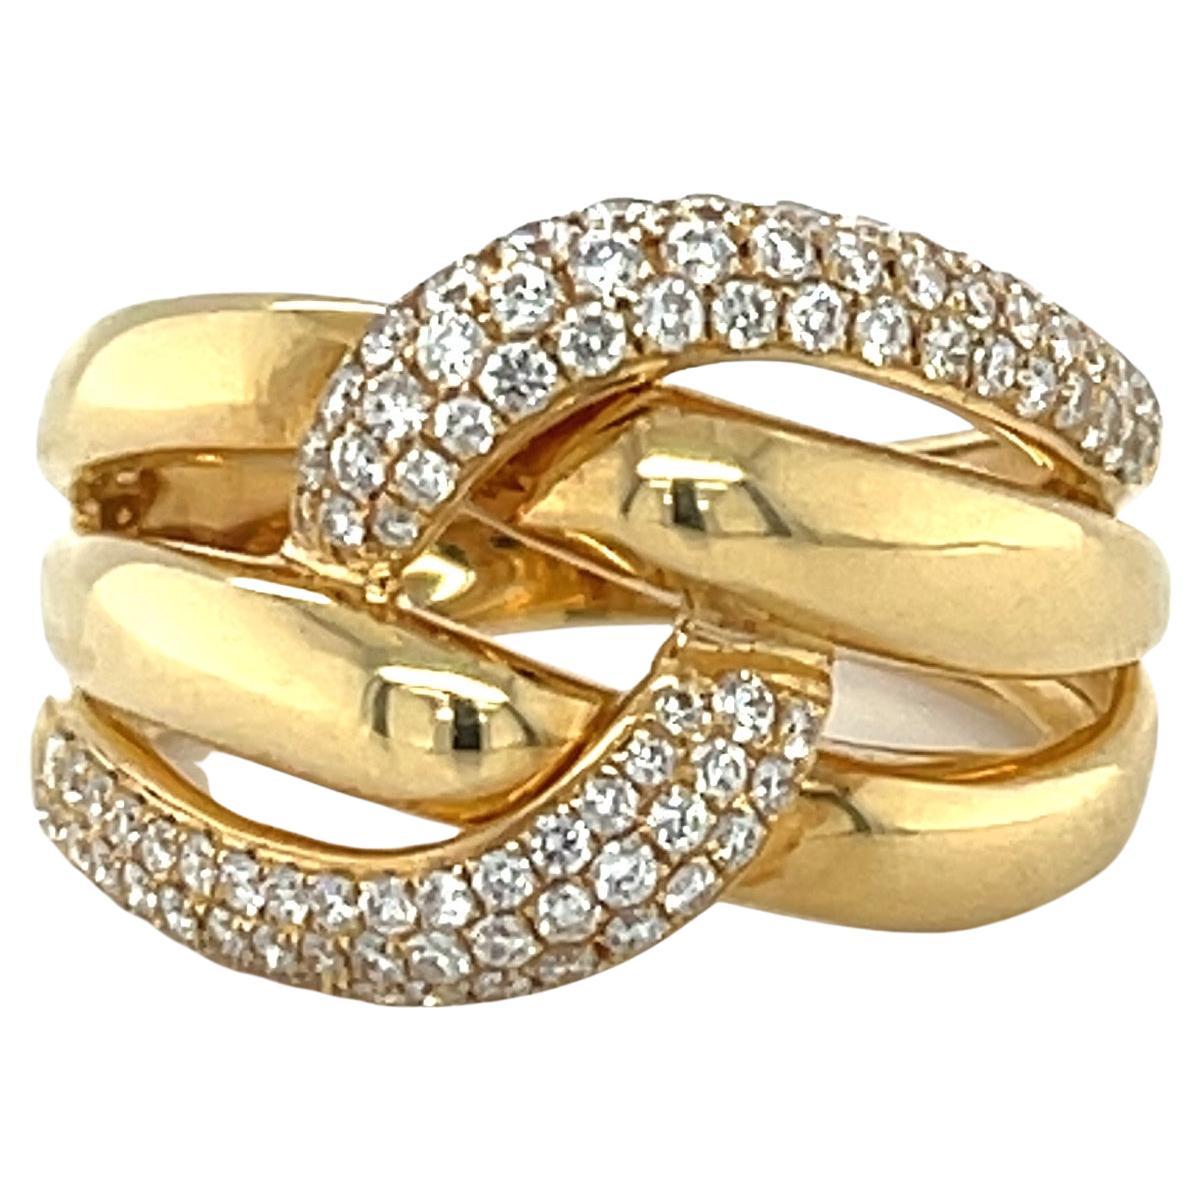 Sparkly round brilliant cut diamonds weighing a total of .63 carats are pave set in this ring. It is a modern take on a classic woven knot design. So pretty and wearable! Make this one your signature piece. Made of 18k yellow gold.

Ring Size: